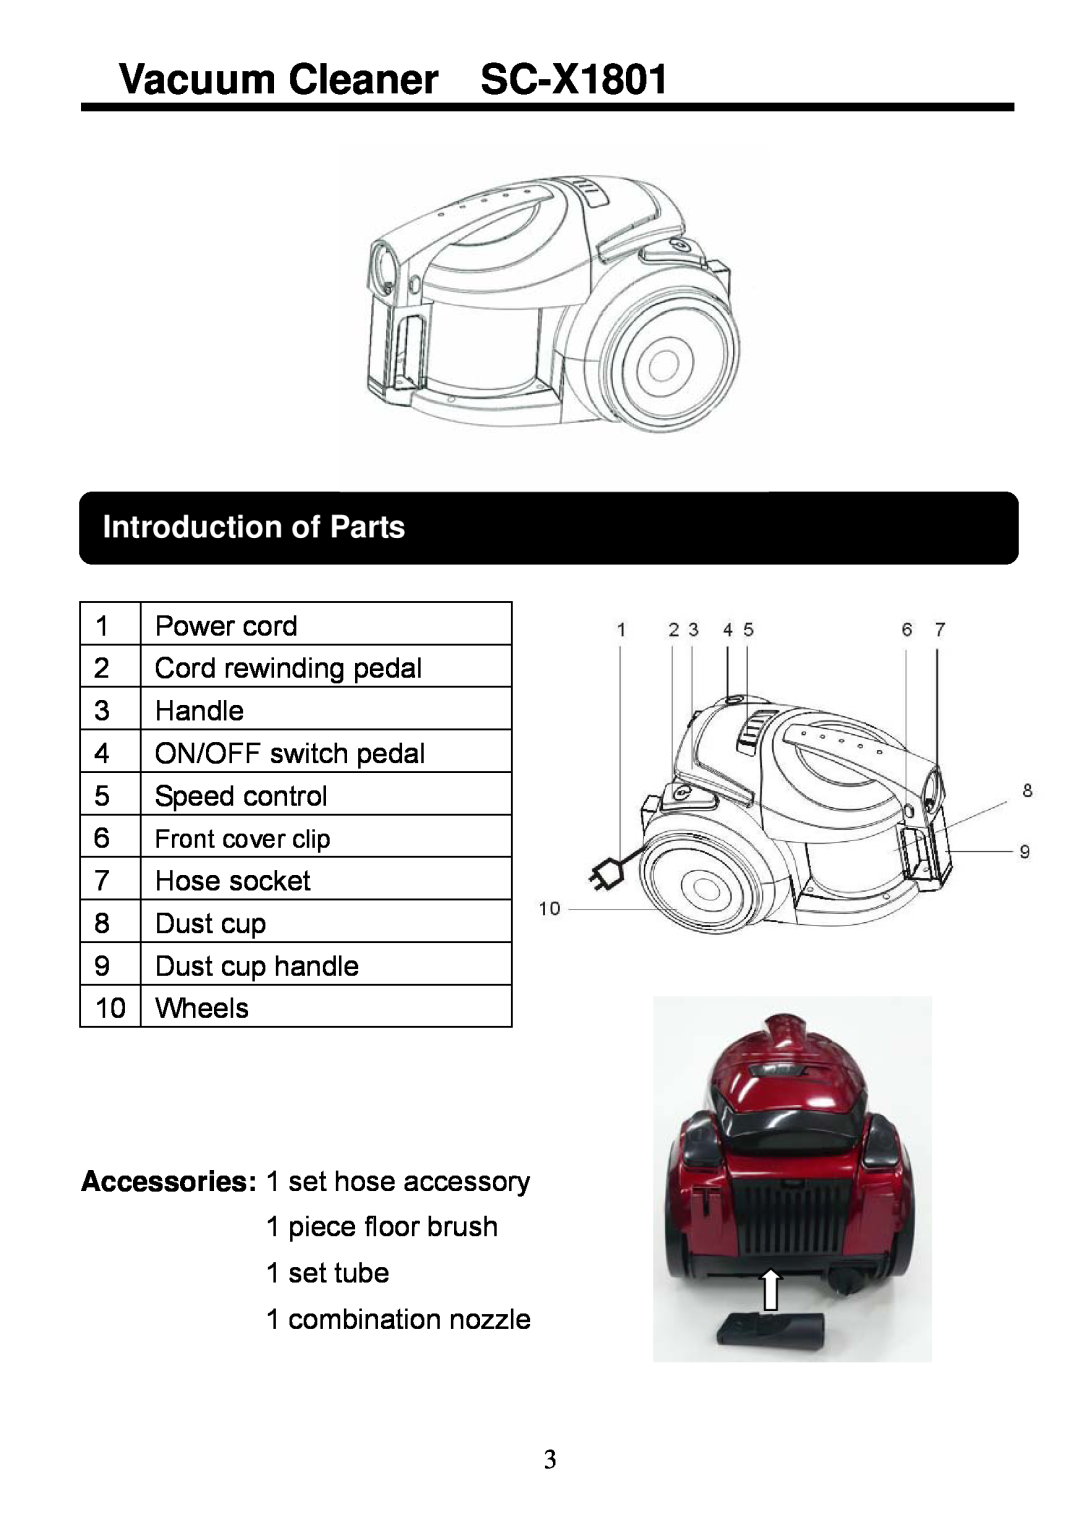 Sanyo SC-X1801R instruction manual Vacuum Cleaner SC-X1801, Introduction of Parts 